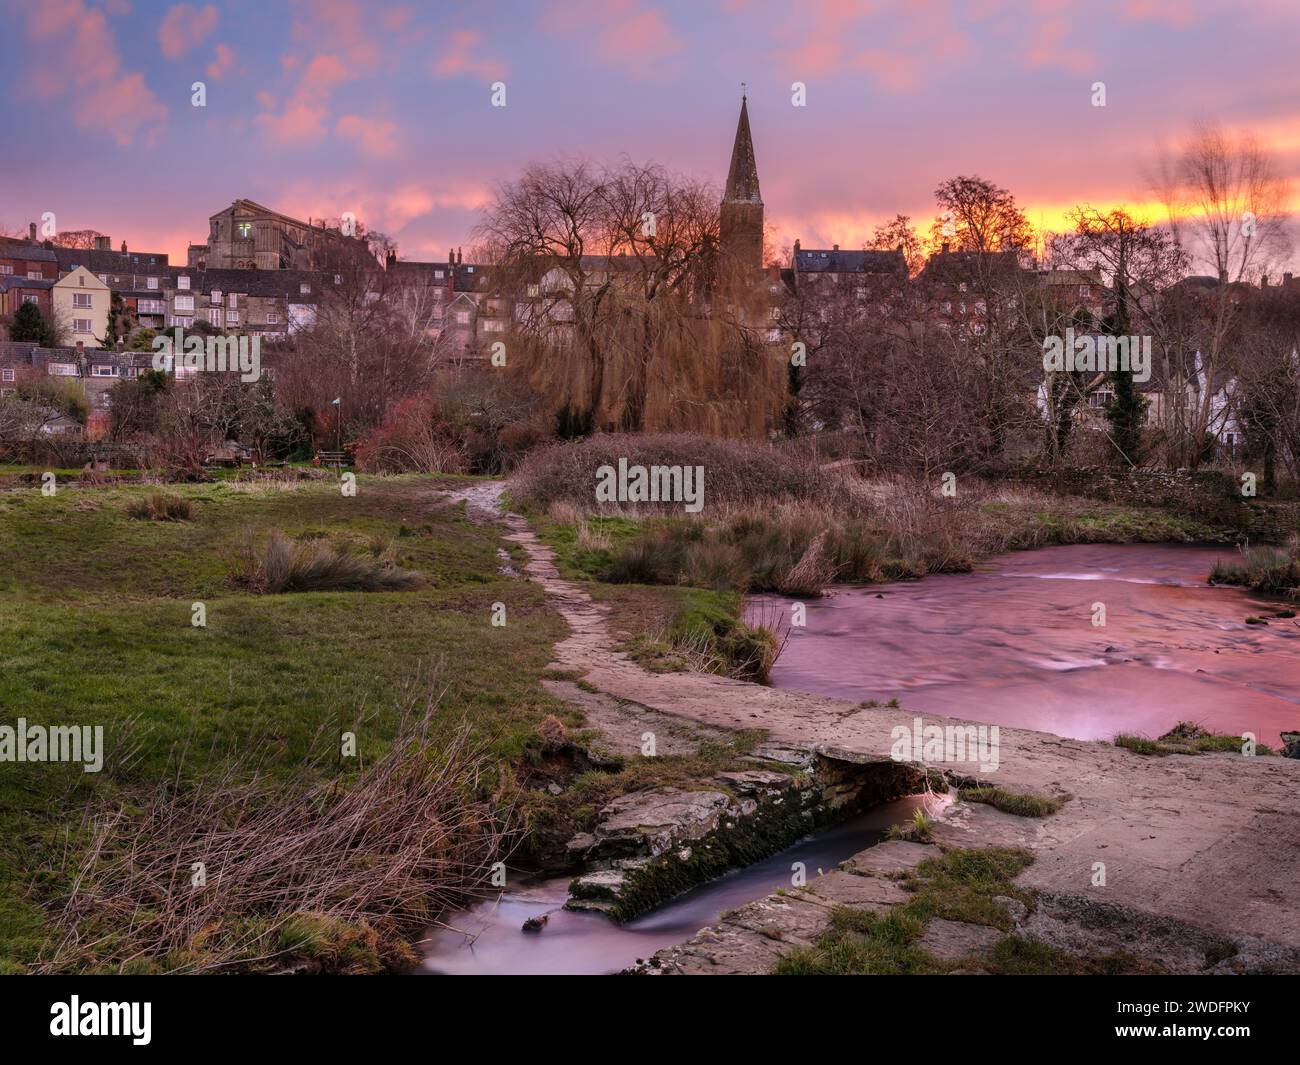 Saturday, January 20th 2024. Malmesbury, Wiltshire, England - As the sun rises across the frozen watermeadow and ancient clapper bridge, the sky turns Stock Photo